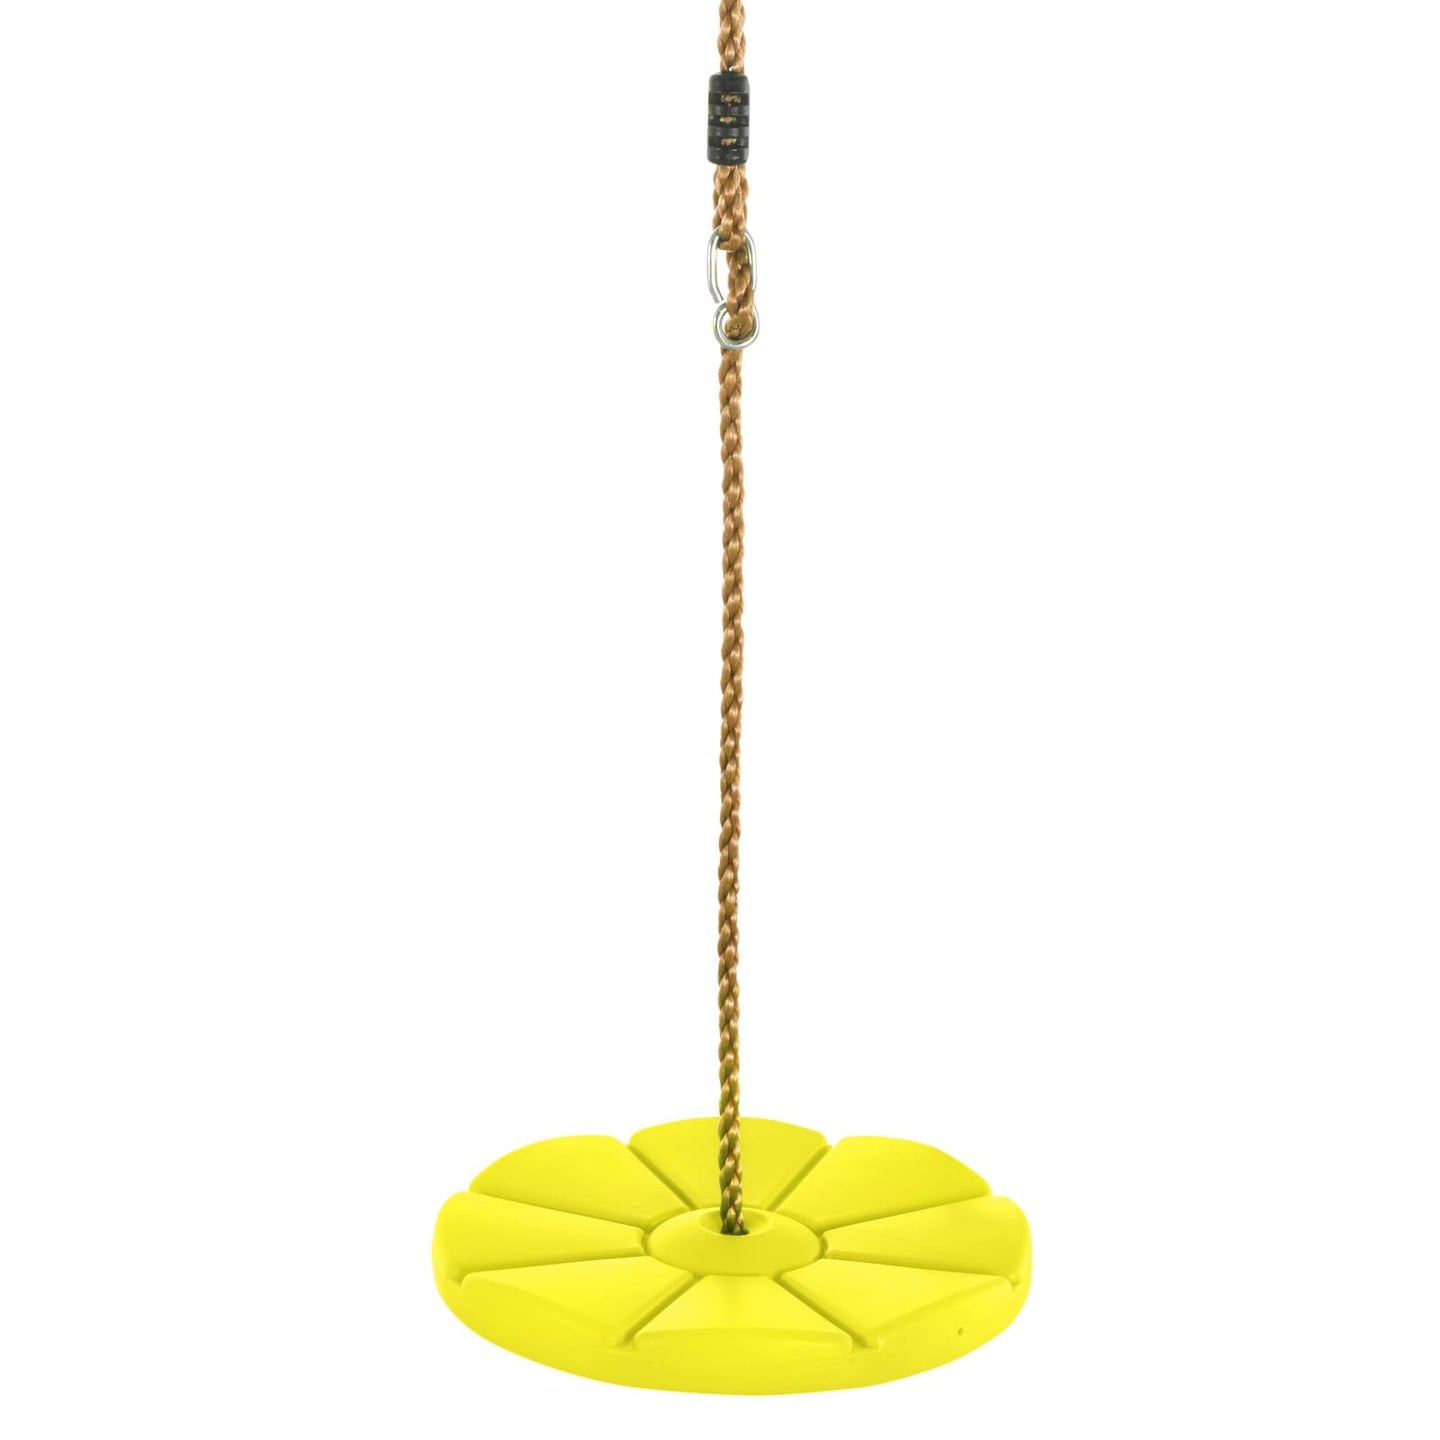 Swingan - Cool Disc Swing With Adjustable Rope - Yellow - SWDSR-YL - Swings & Accessories